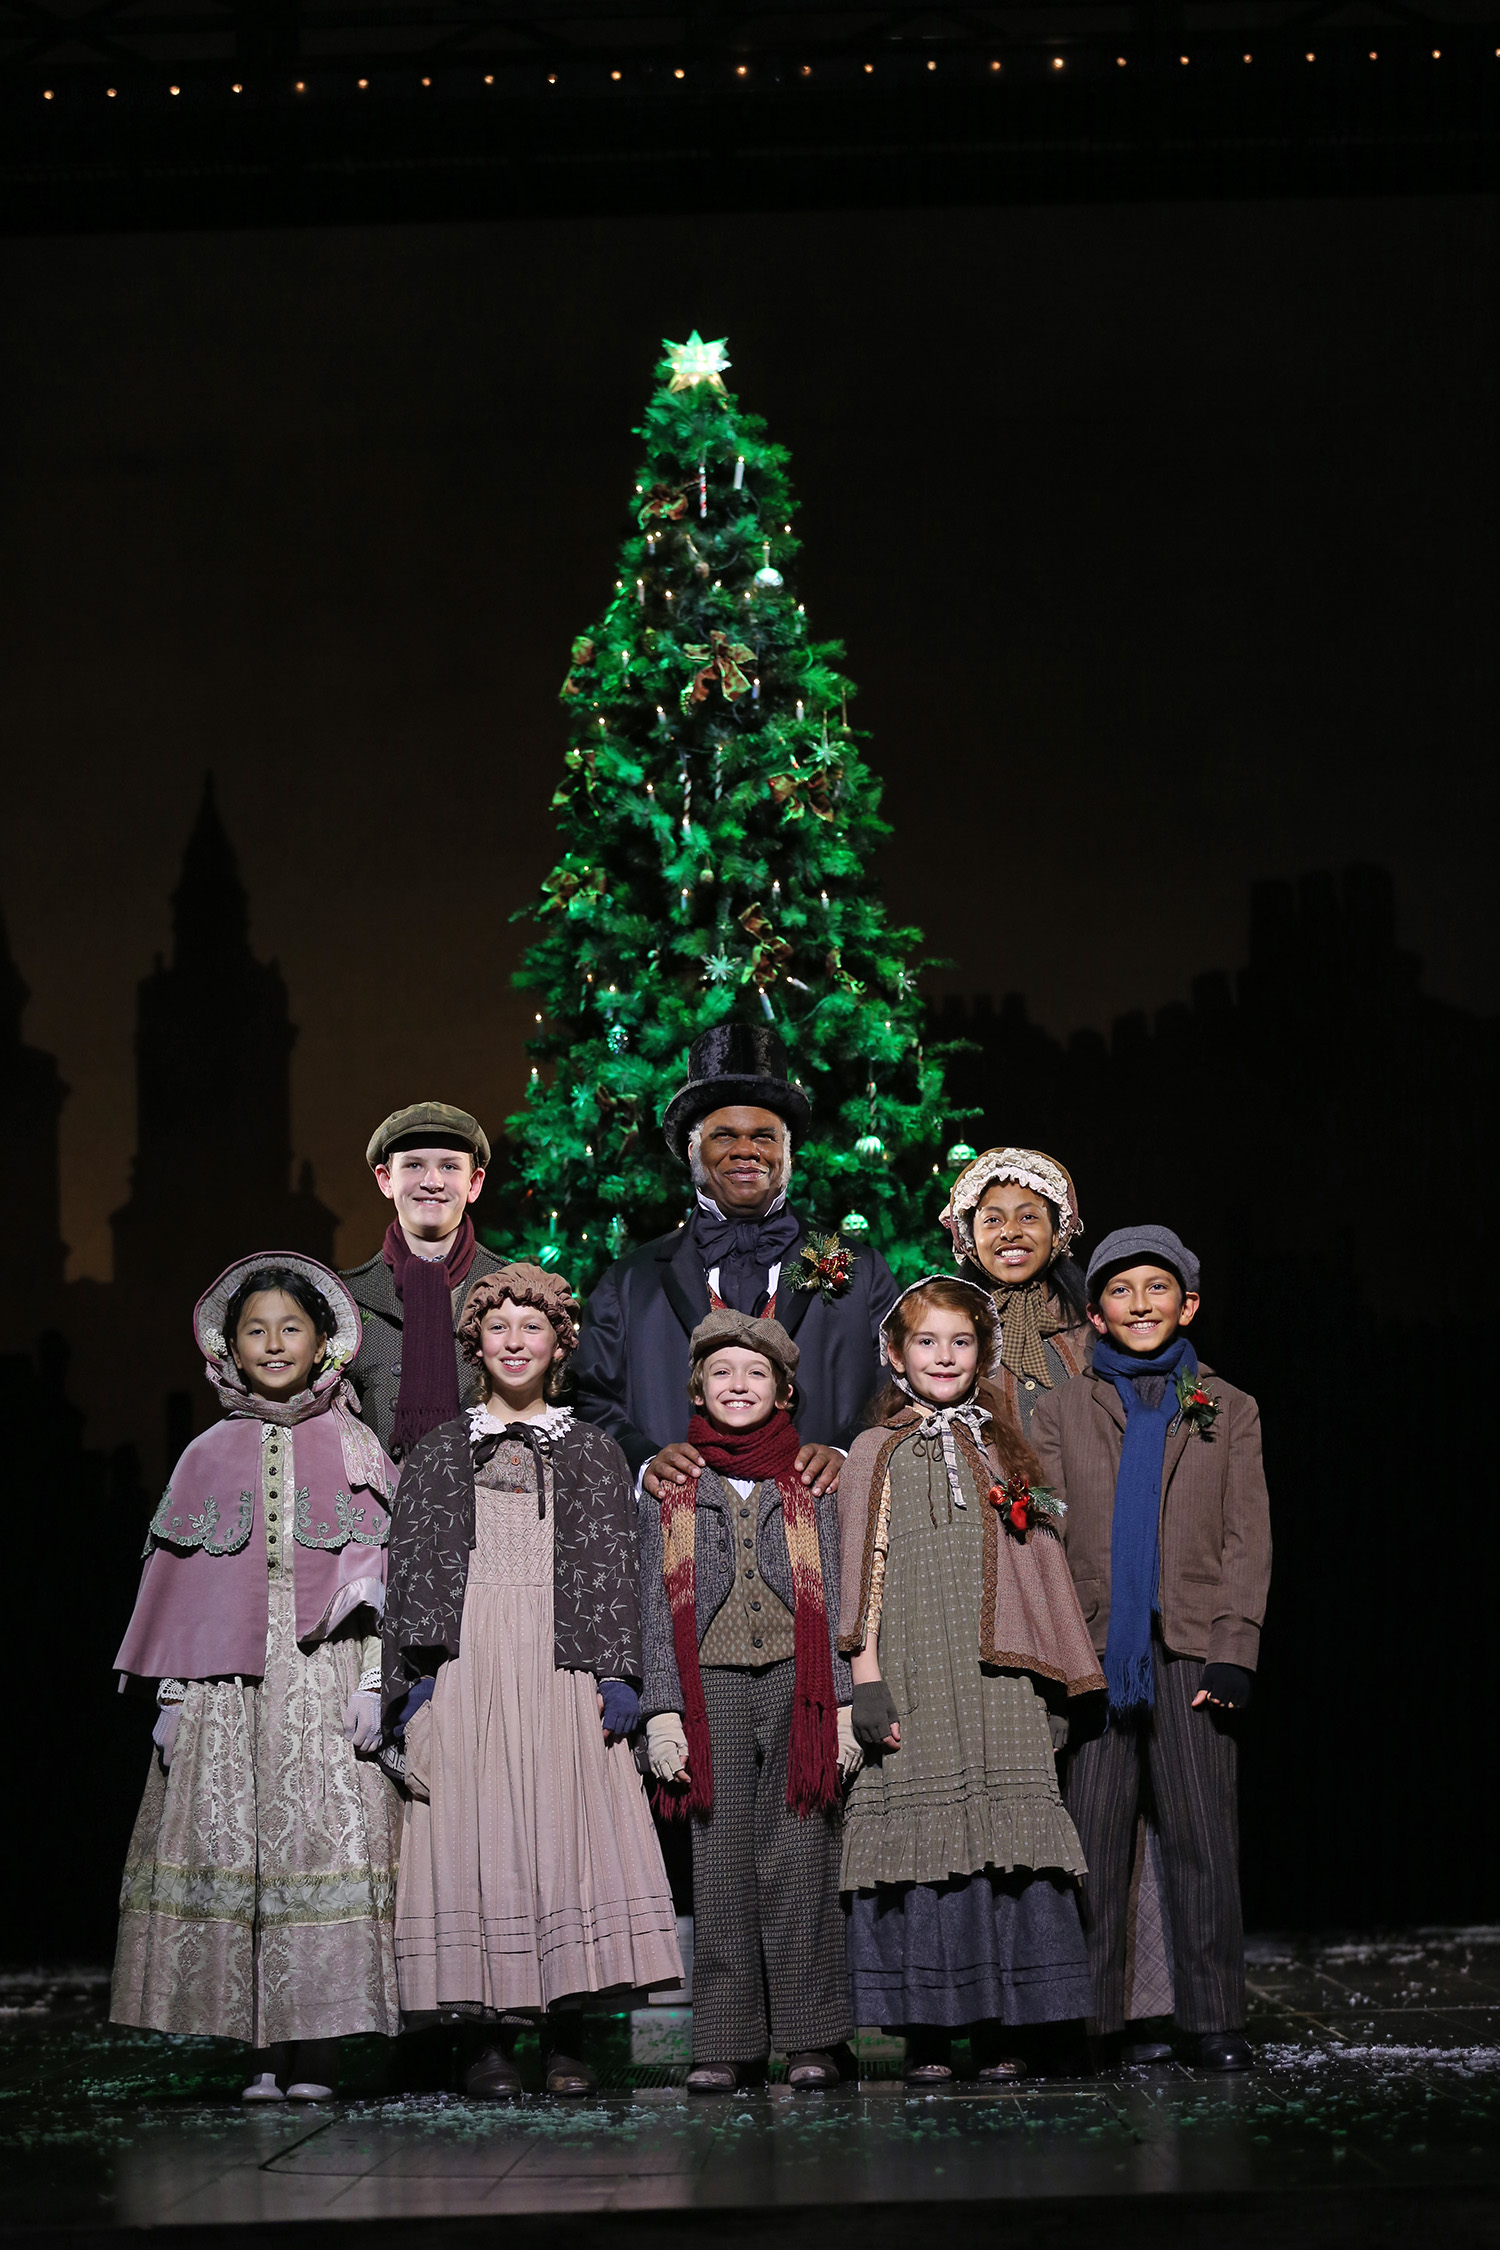 A smiling man in Victorian-style clothes and a top hat stands with a group of children, also in Victorian-style clothing, in front a large Christmas tree.